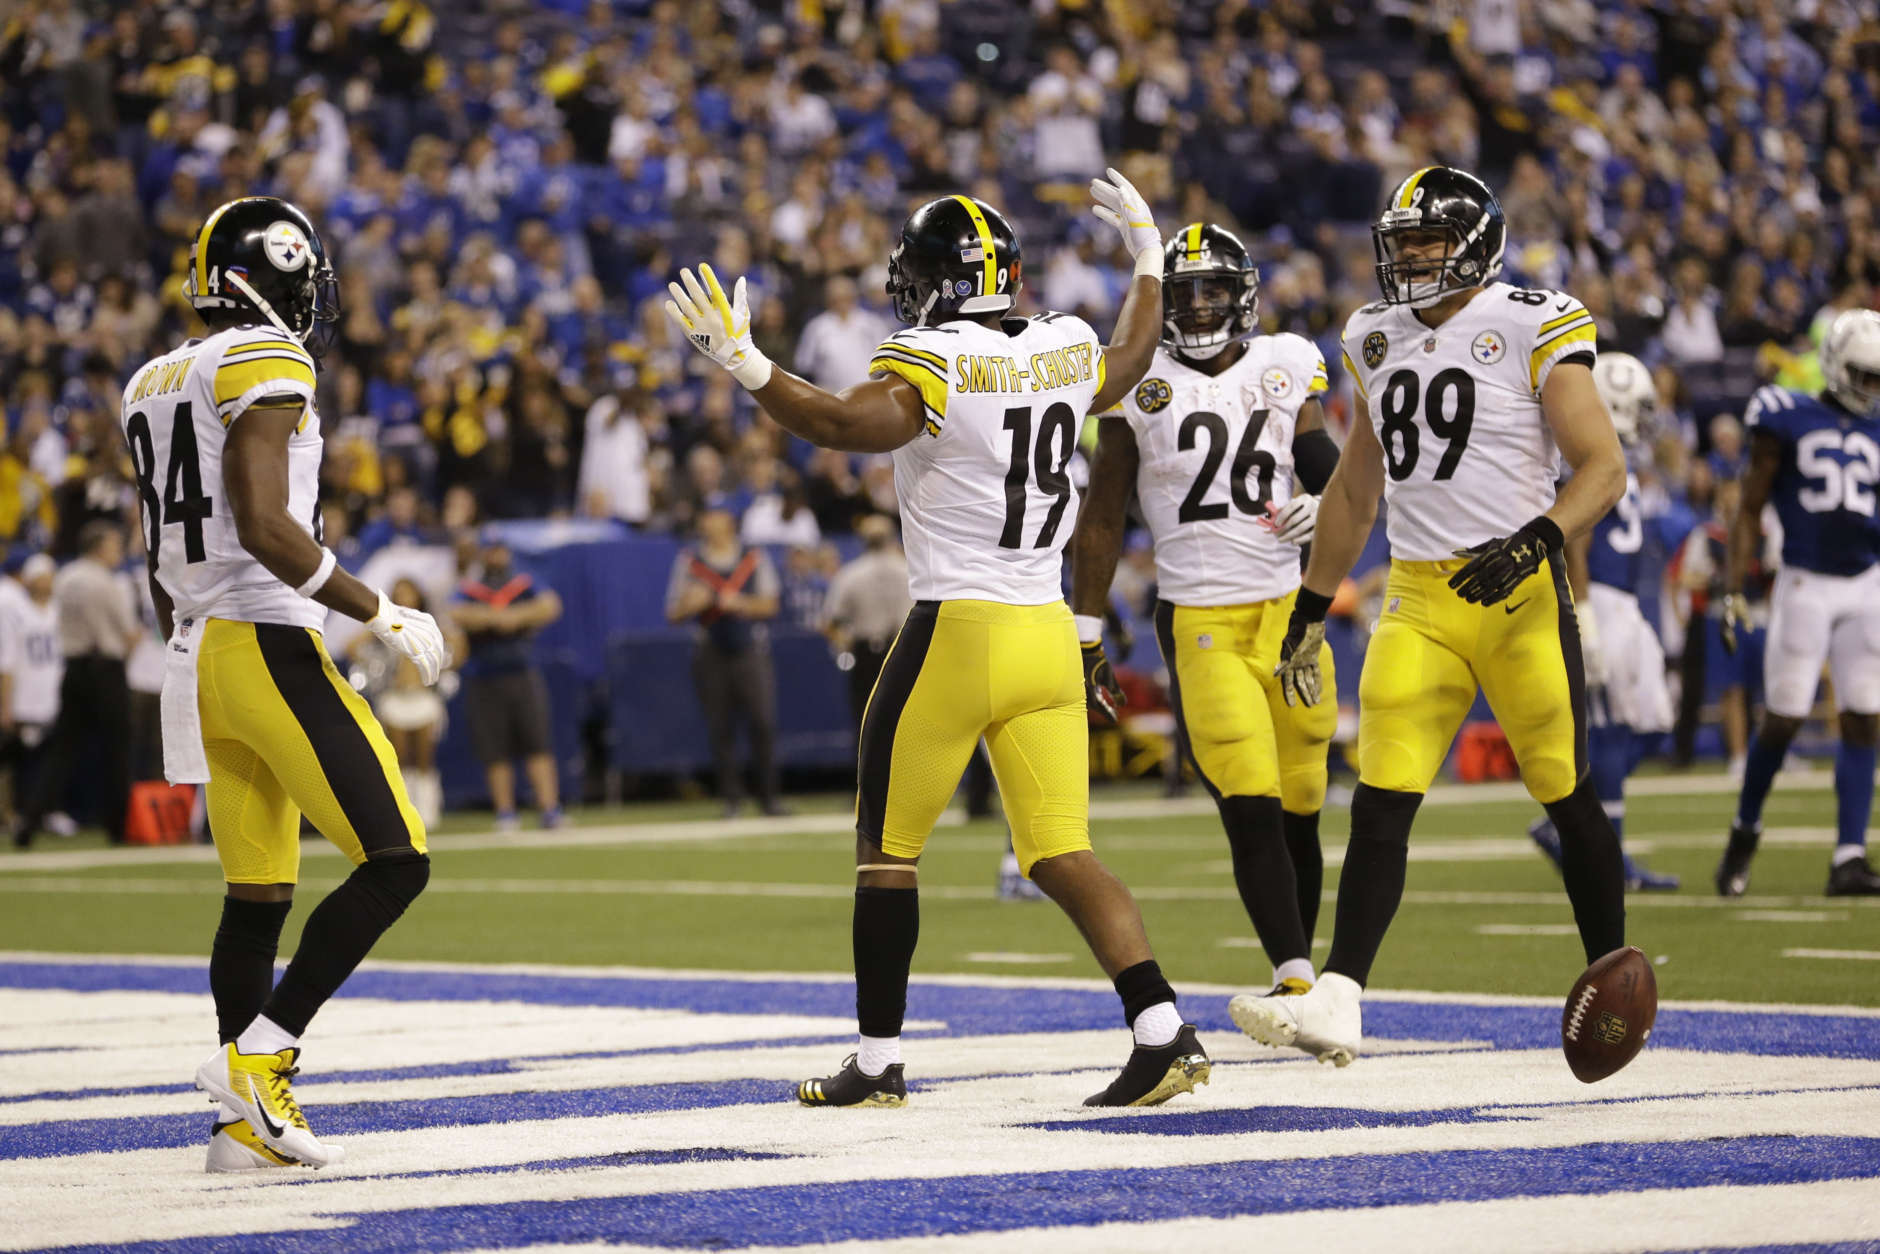 Pittsburgh Steelers wide receiver JuJu Smith-Schuster (19) celebrates his touchdown against the Indianapolis Colts during the second half of an NFL football game in Indianapolis, Sunday, Nov. 12, 2017. (AP Photo/AJ Mast)